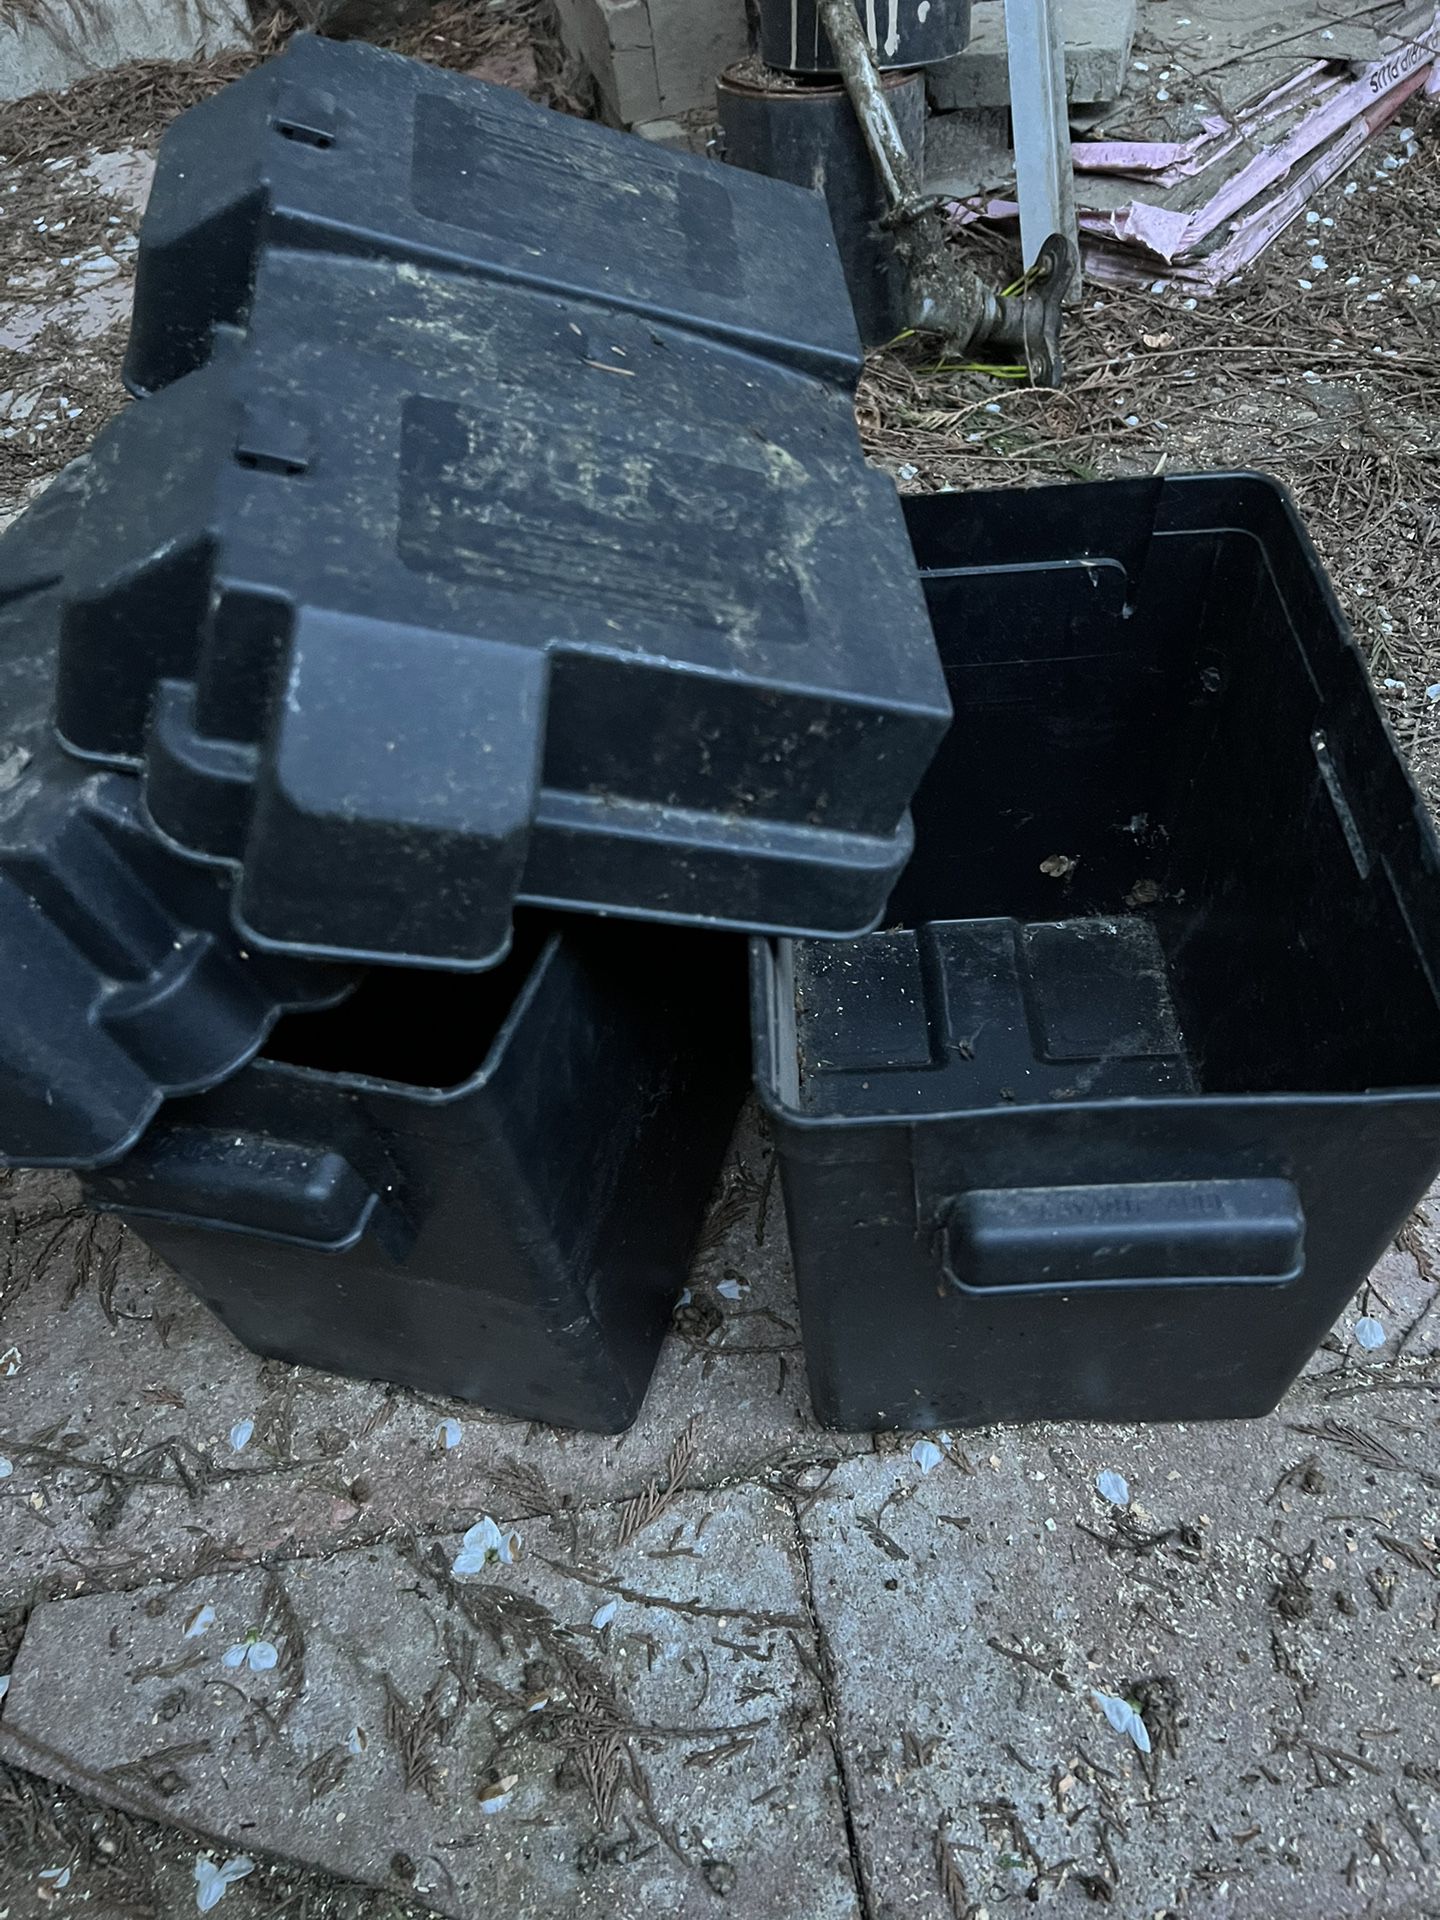 2 RVS trailer battery boxes